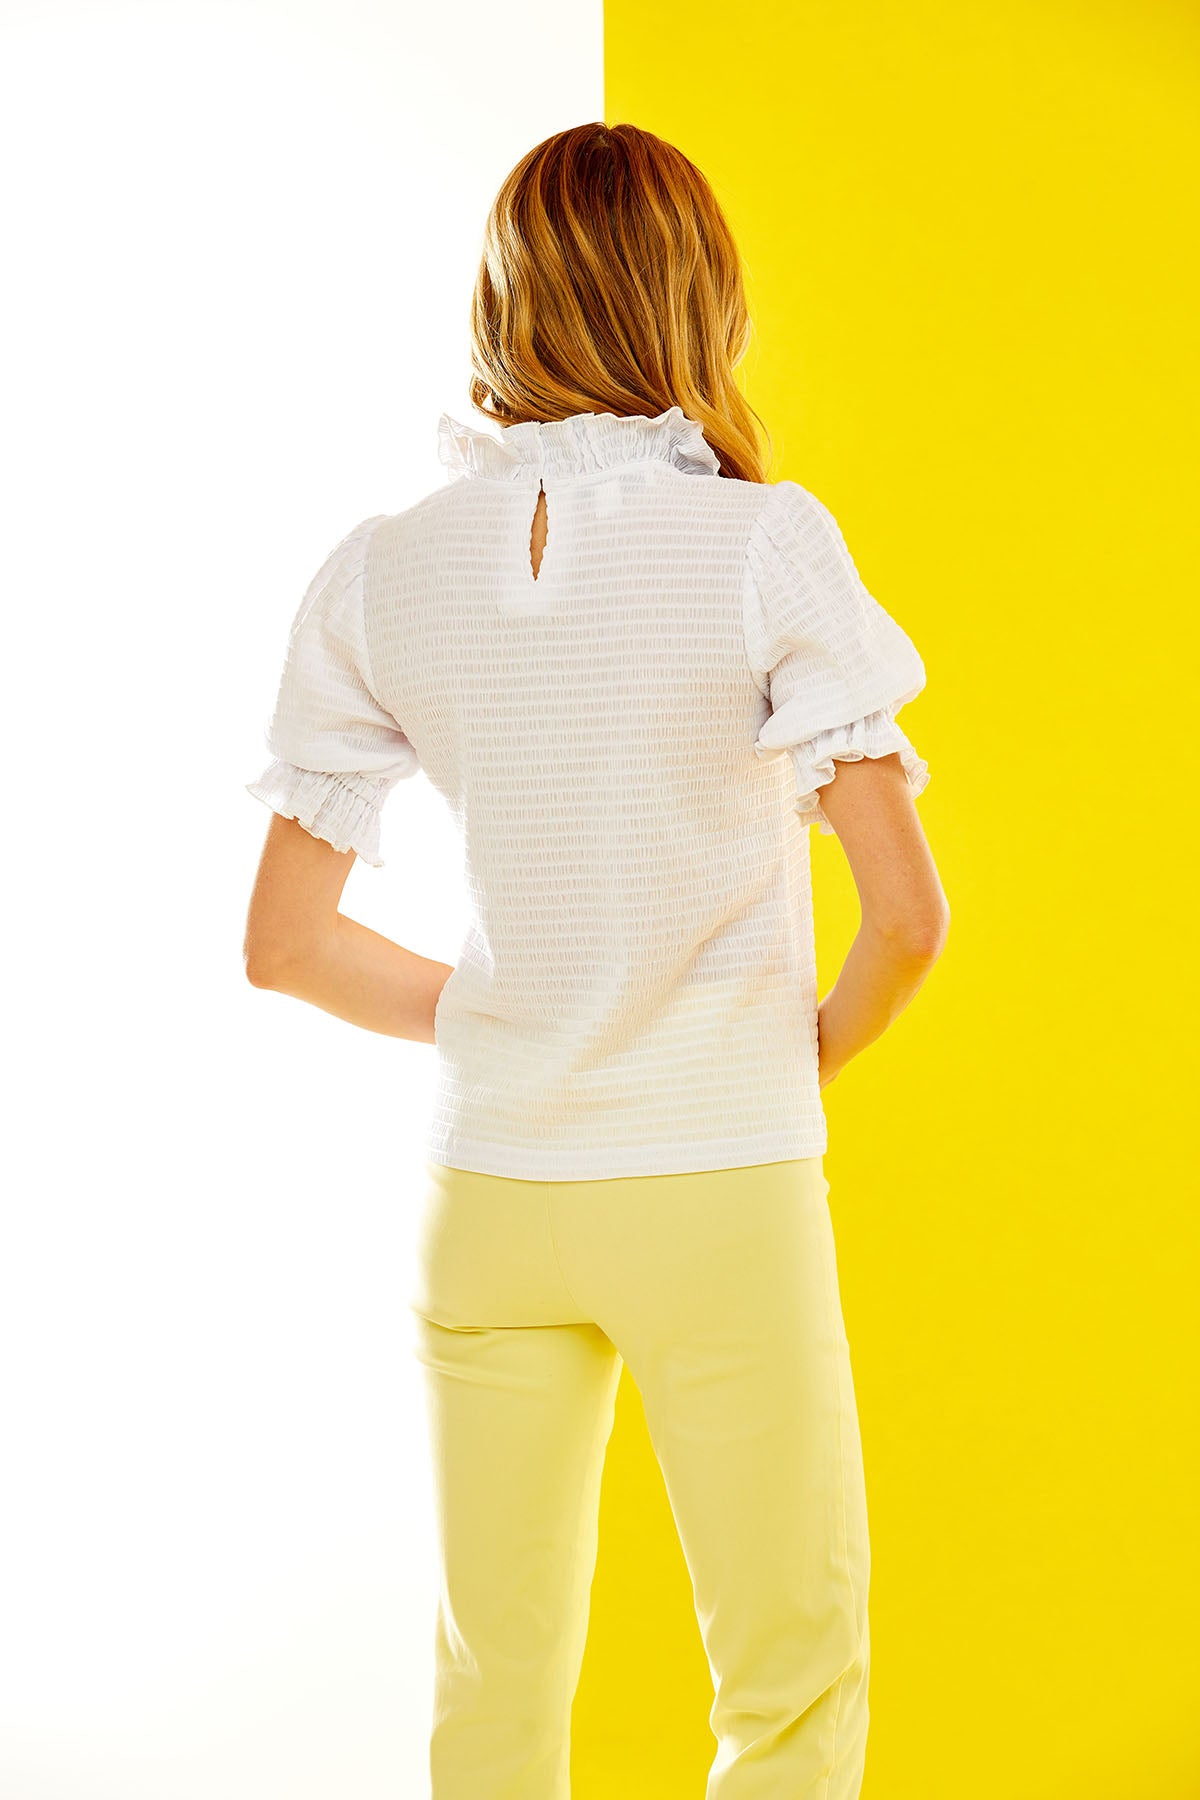 Back view of a woman in a white tee